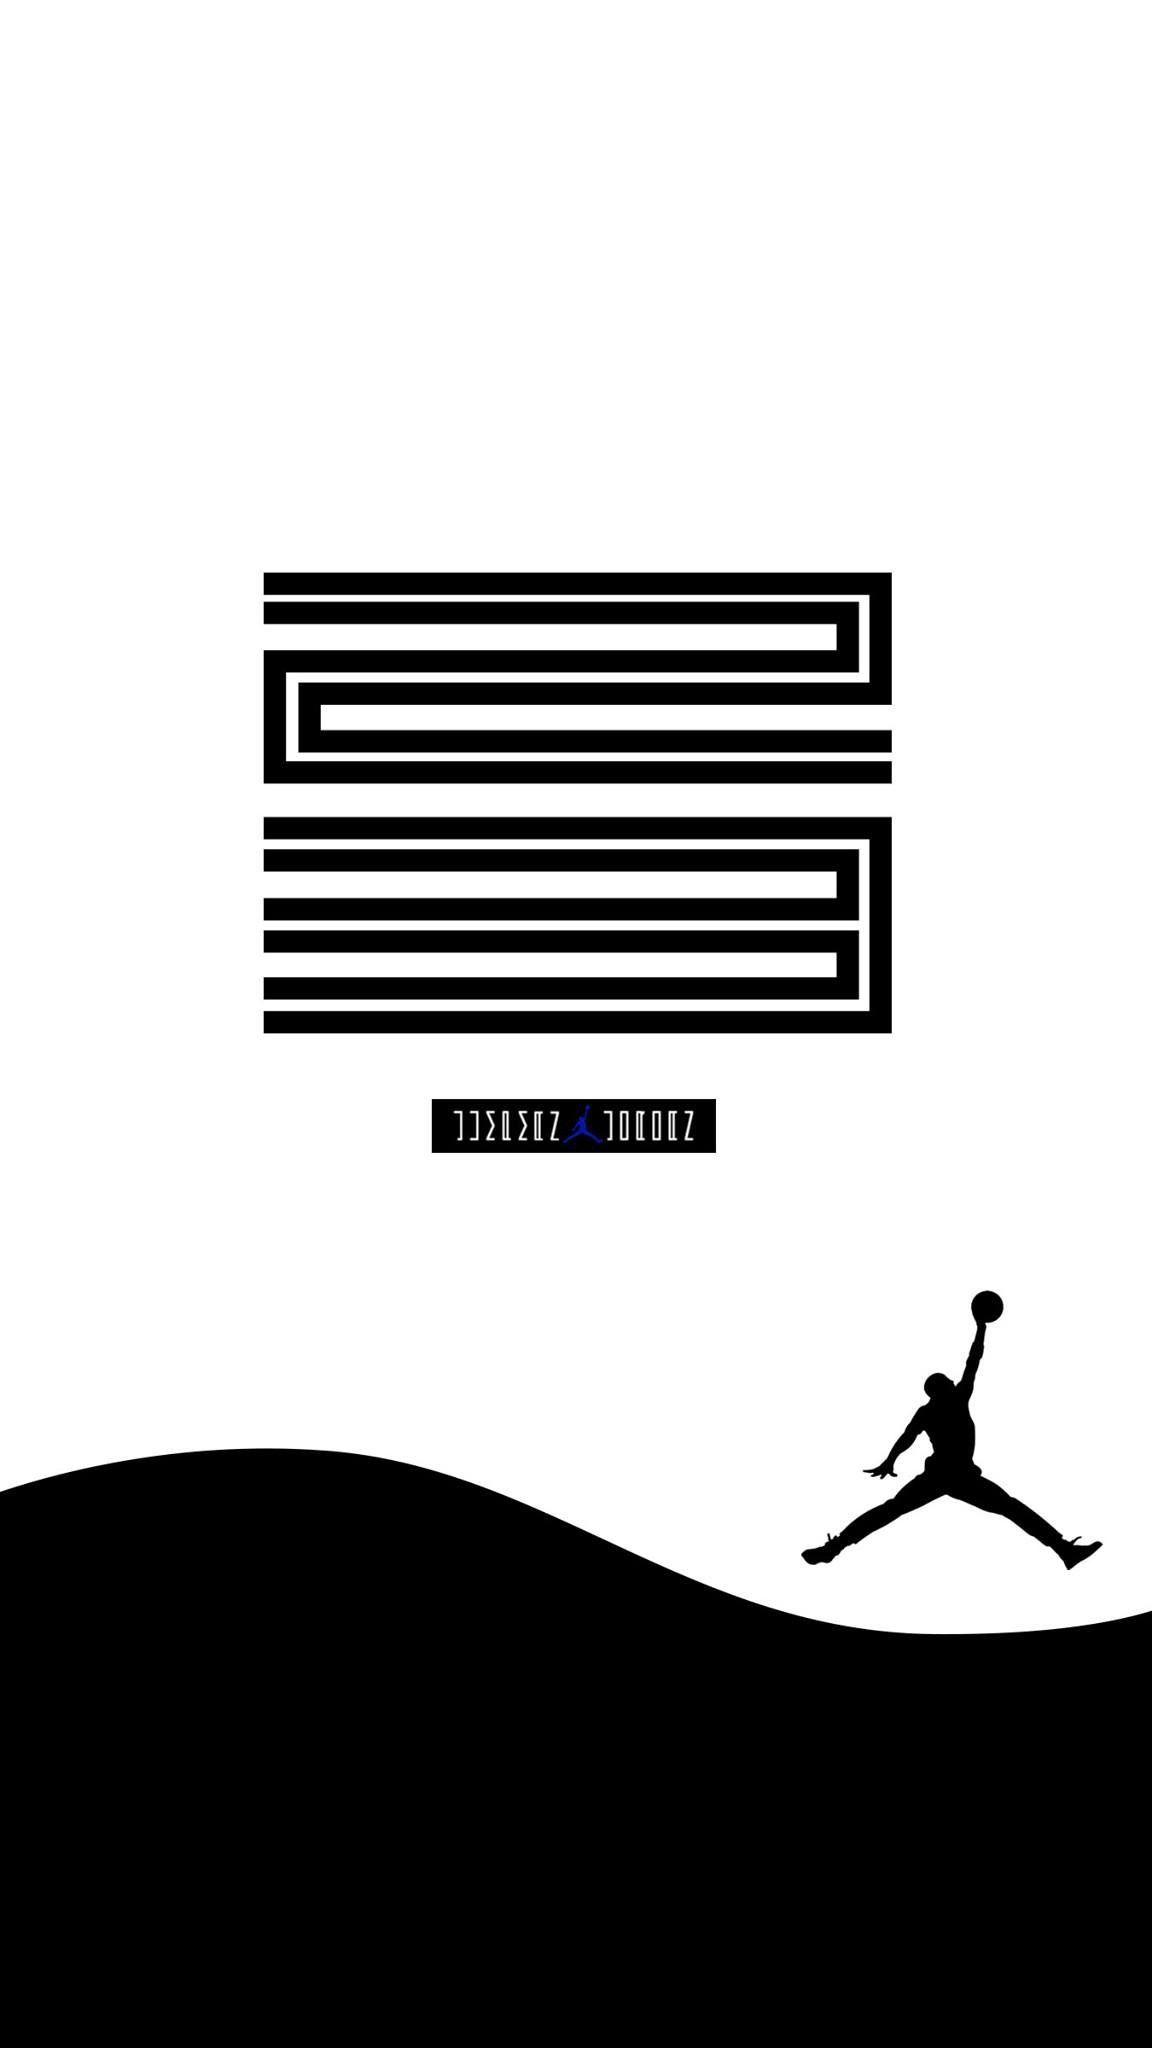 Jordan 11 concords mobile wallpaper. Projects to Try